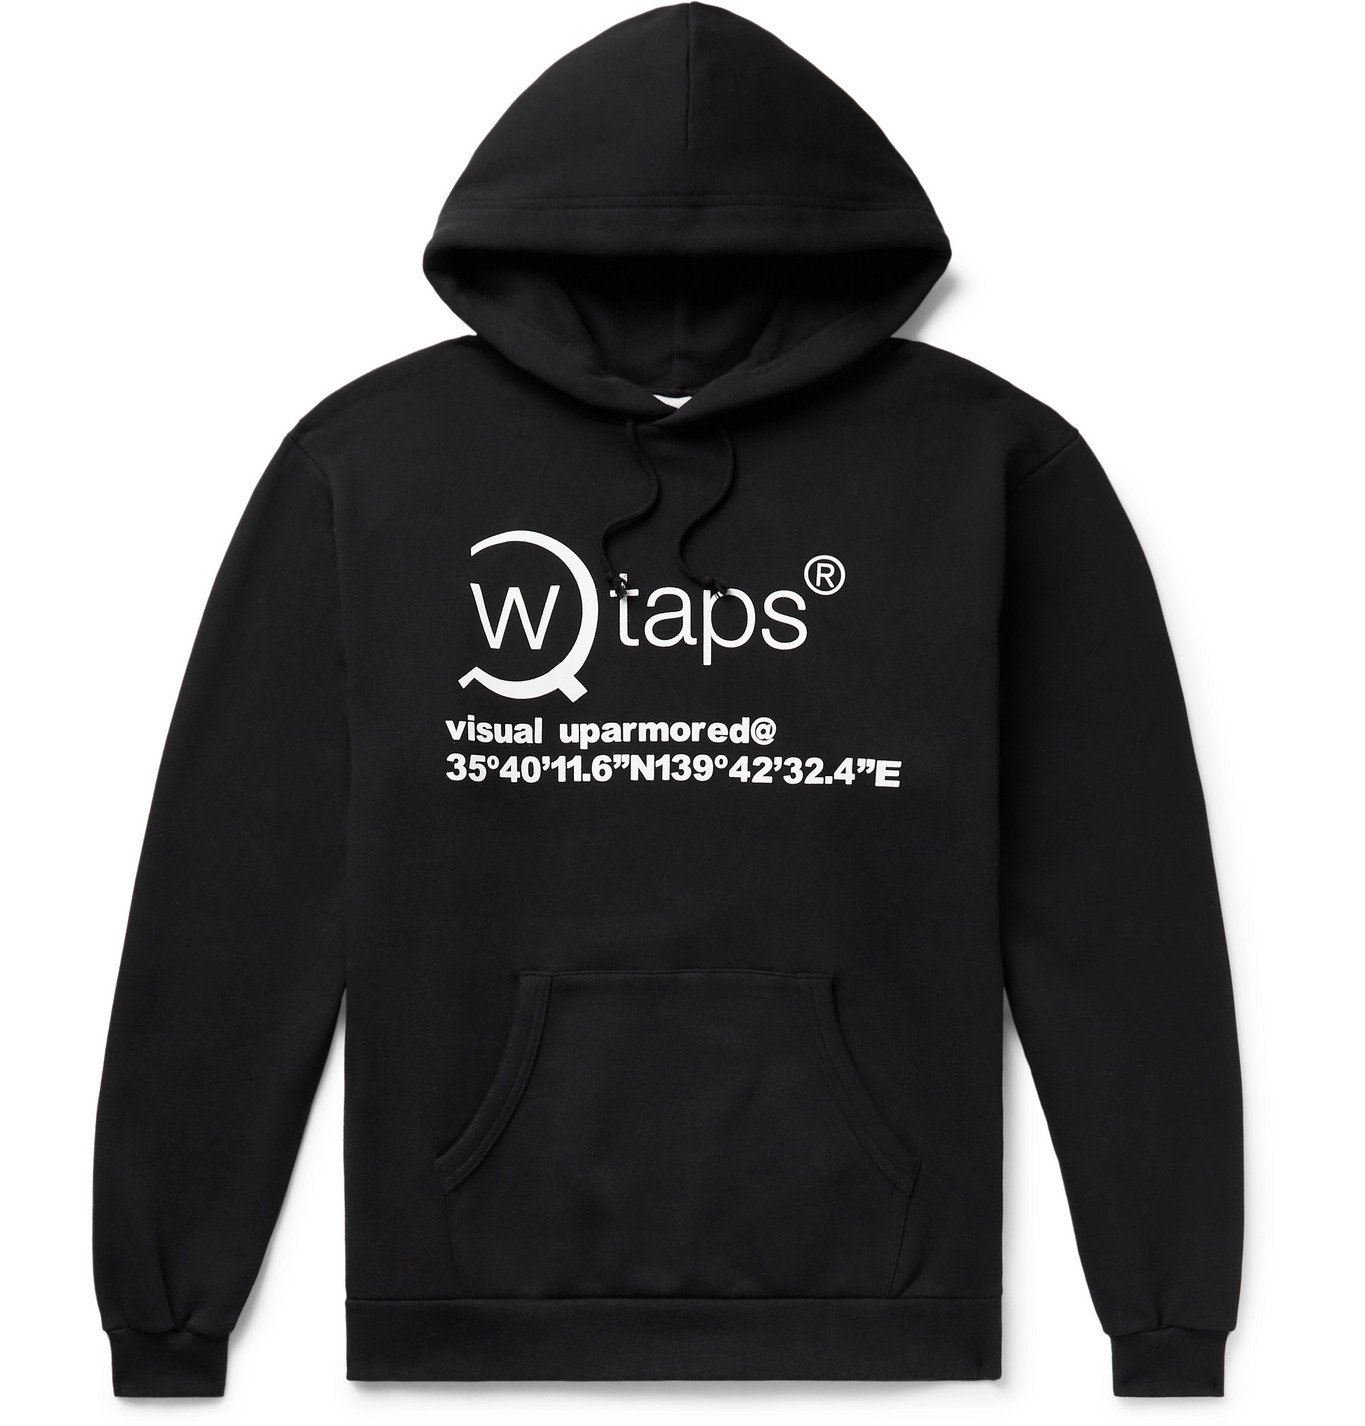 WTAPS VISUAL UPARMORED  HOODY XL